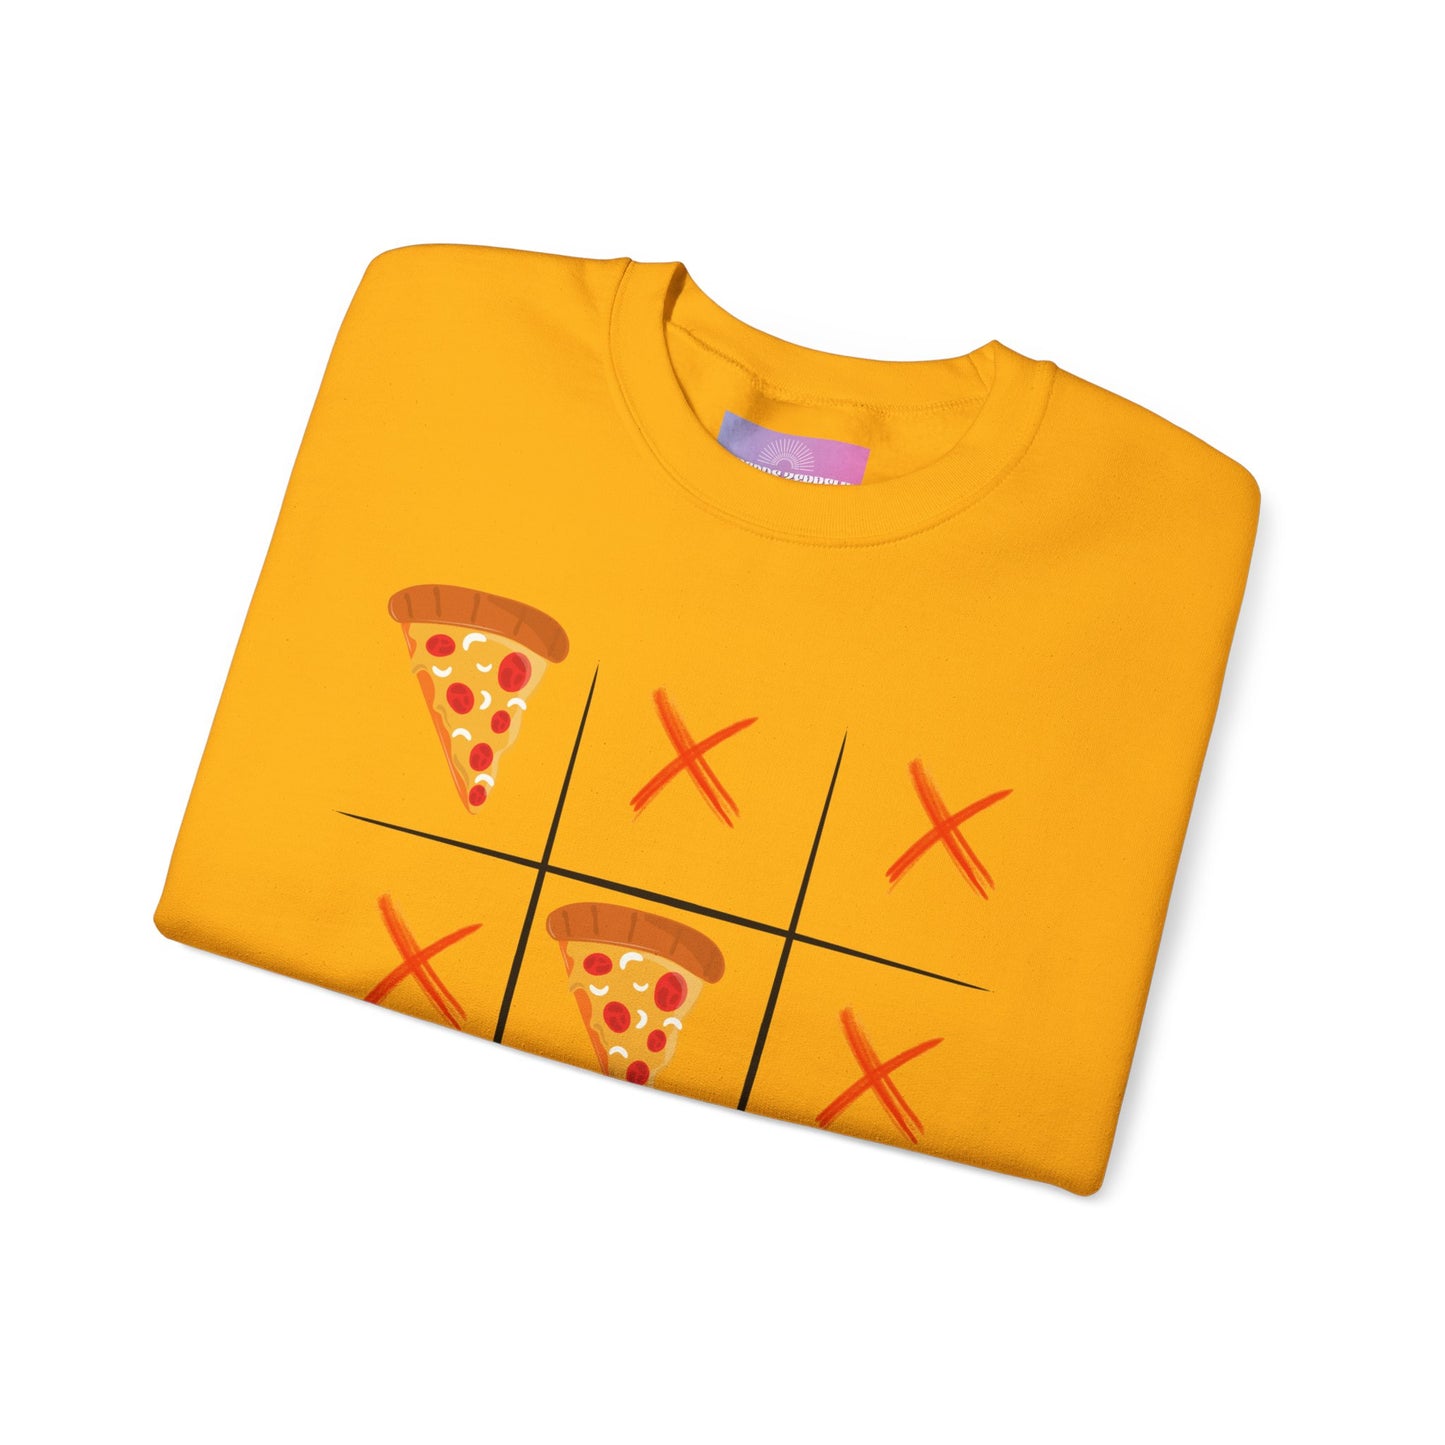 Valentines Day Pizza Slice Sweatshirt, Tic-Tac-Toe Valentines Day Crewneck Sweater, Funny Valentines Day, Gift for her, pizza lovers gift